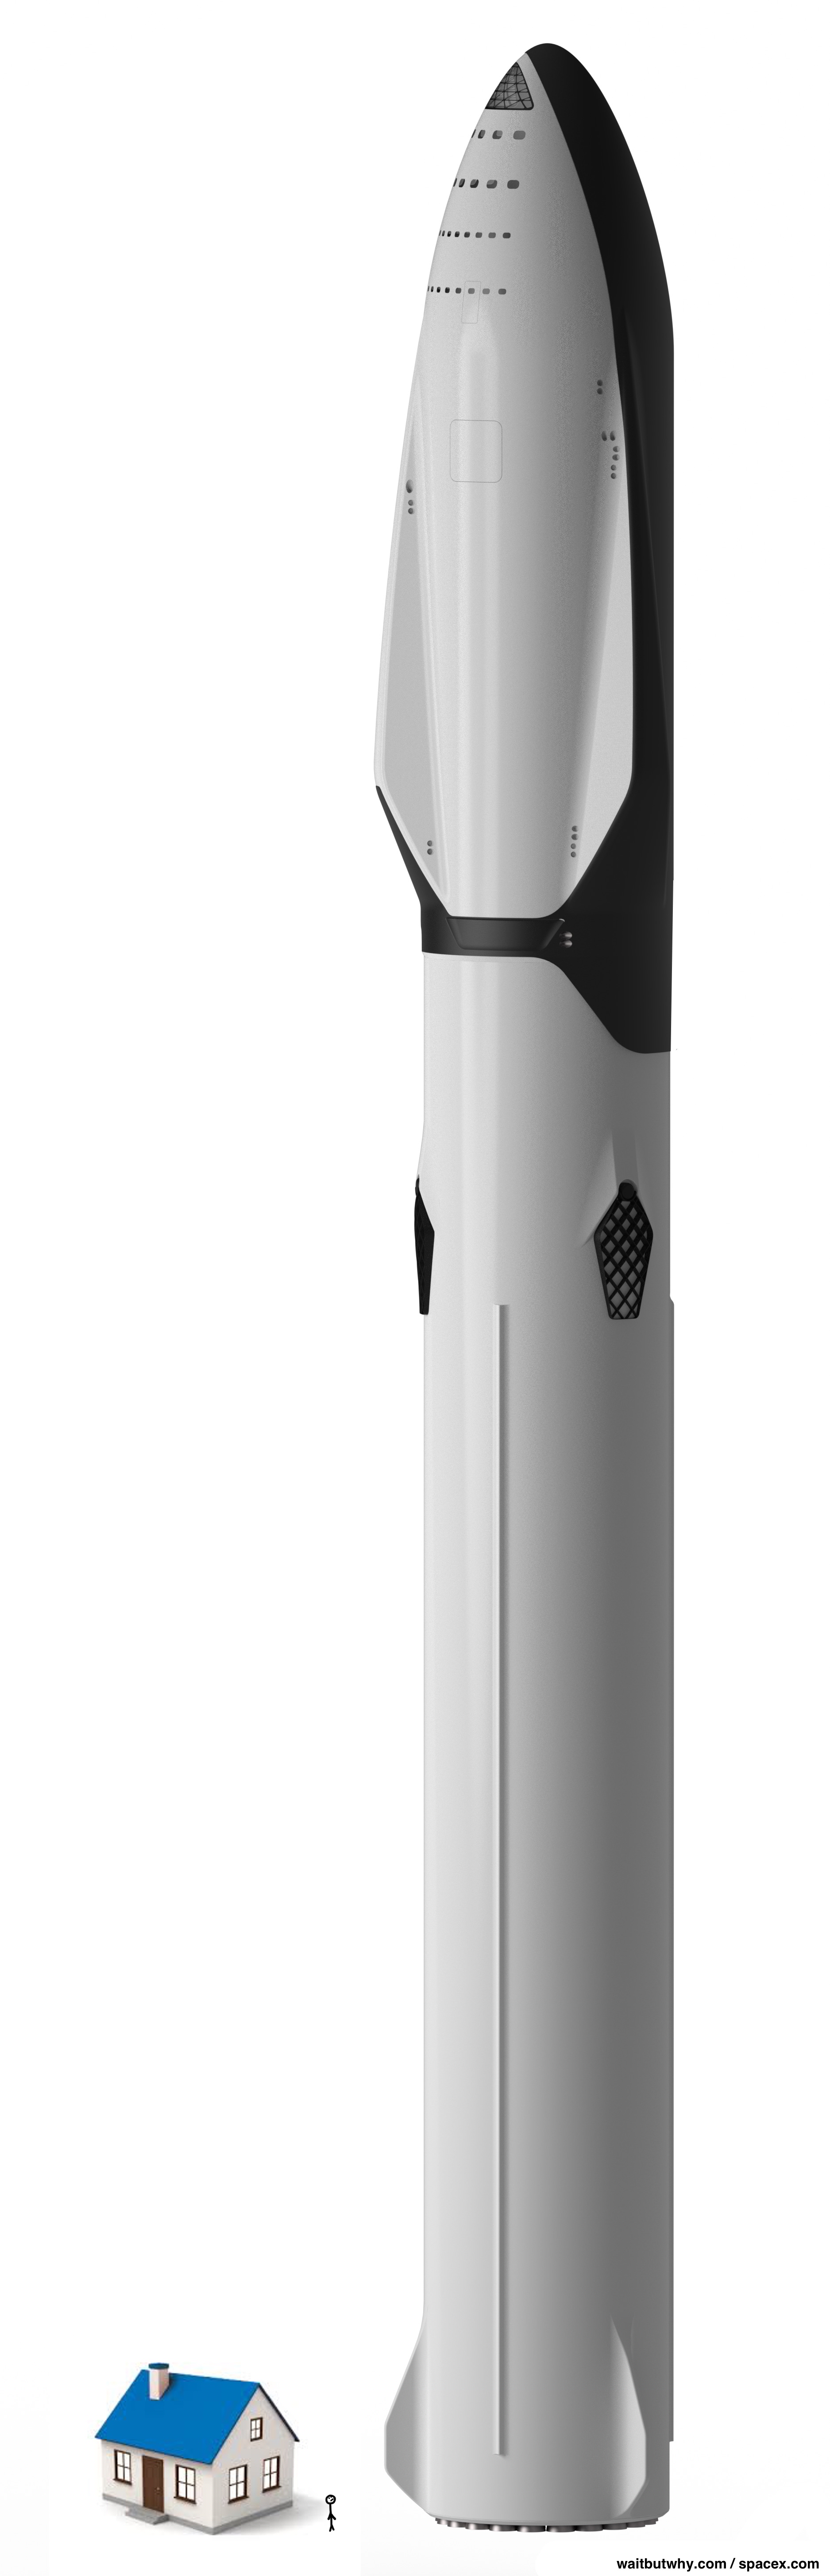 spacex mars rocket with house and person drawn to scale